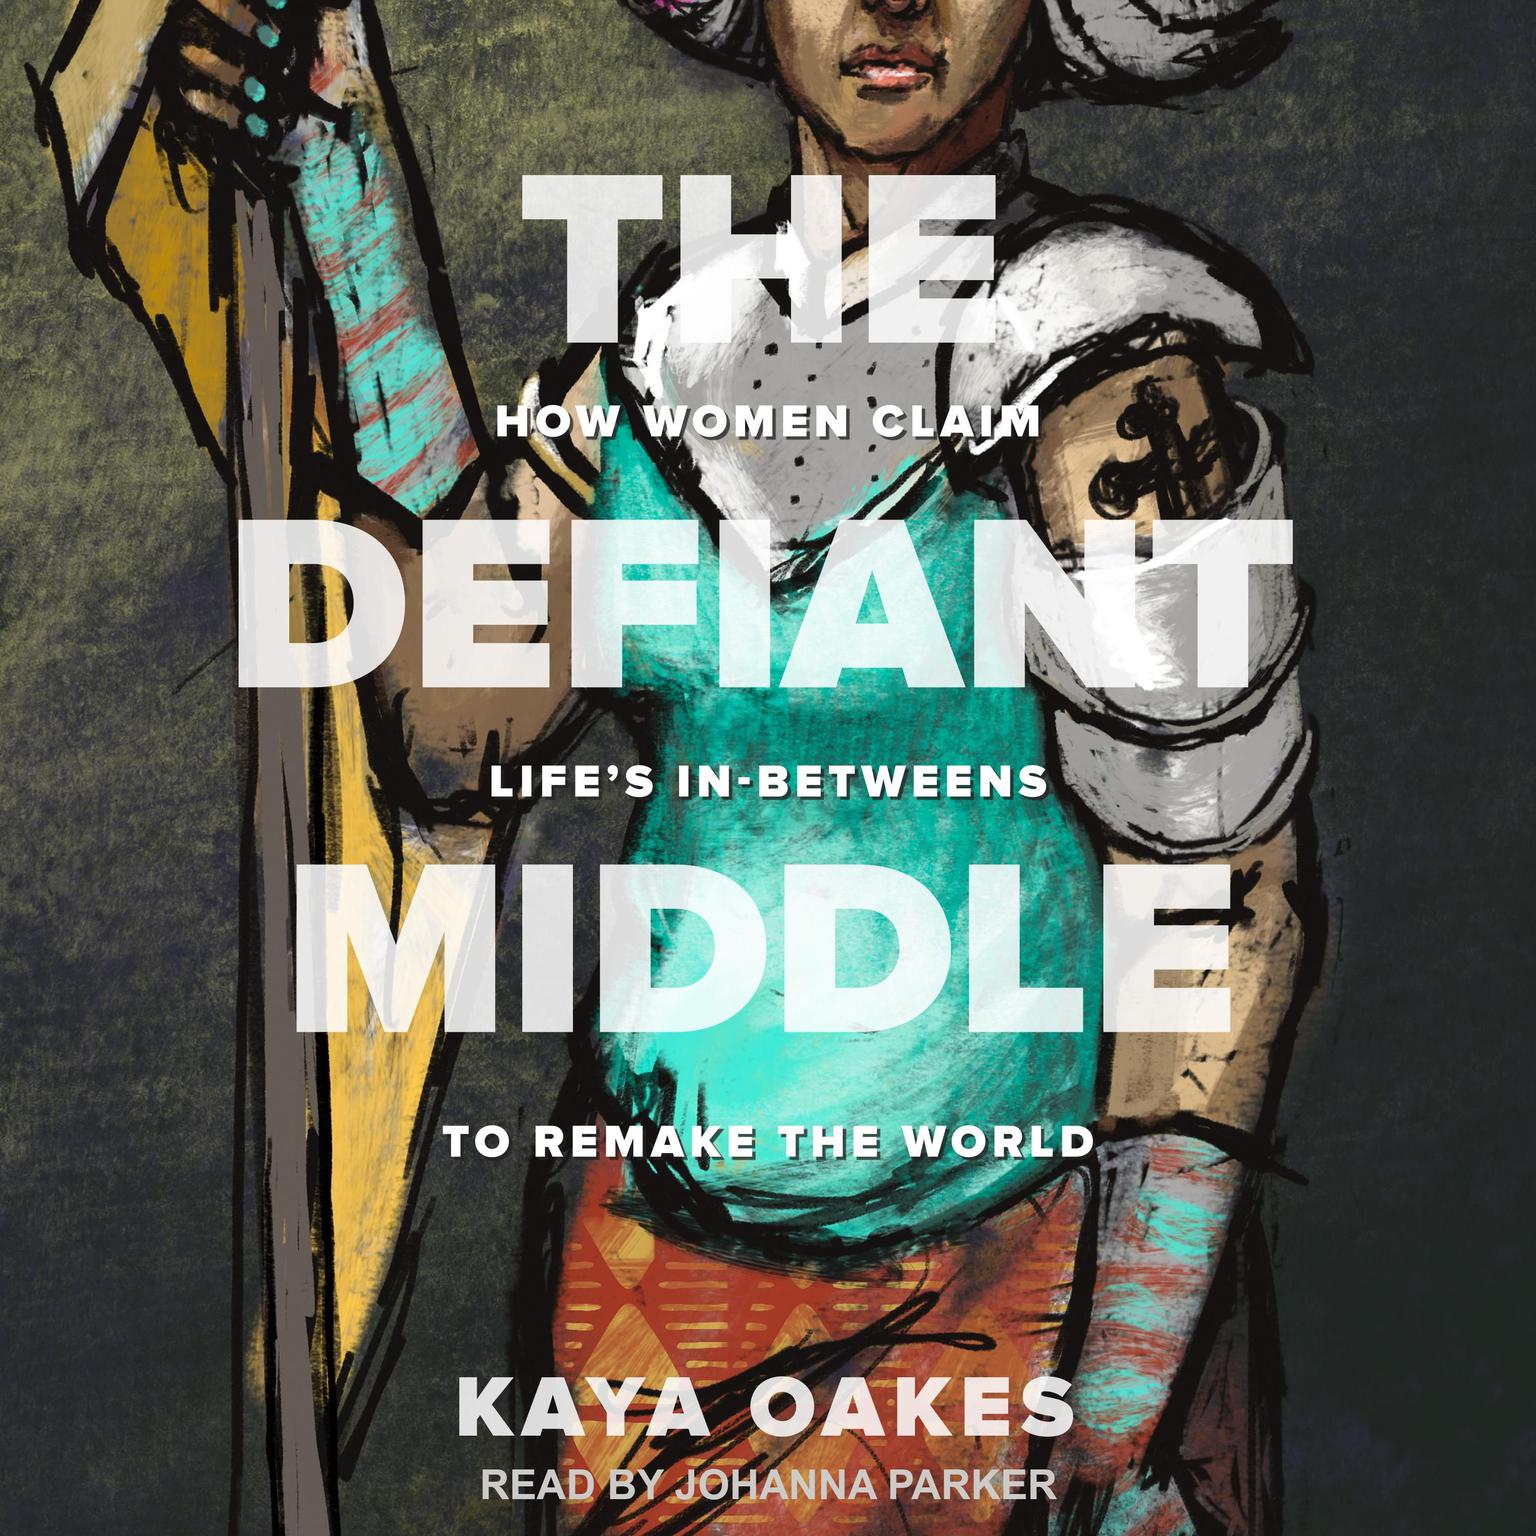 The Defiant Middle: How Women Claim Lifes In-Betweens to Remake the World Audiobook, by Kaya Oakes